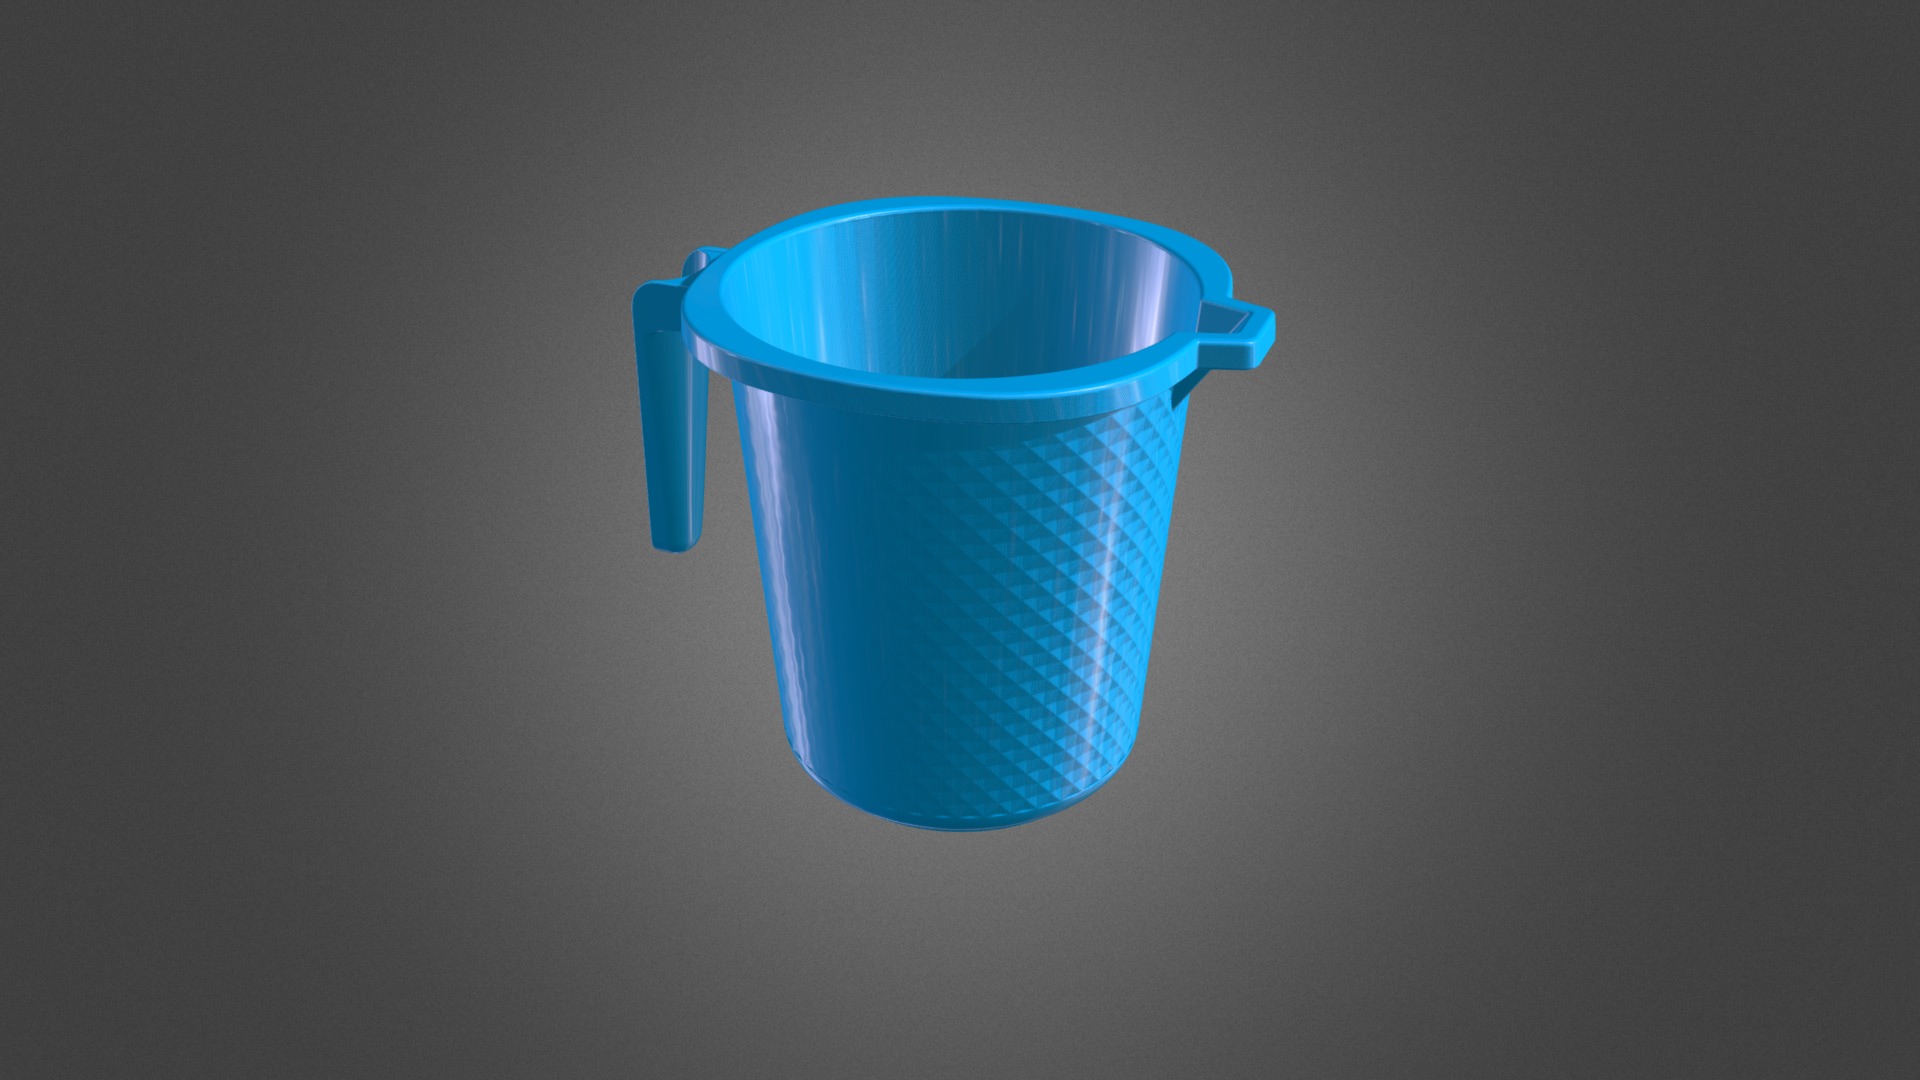 3D model Diamond Mug - This is a 3D model of the Diamond Mug. The 3D model is about a blue plastic bucket.